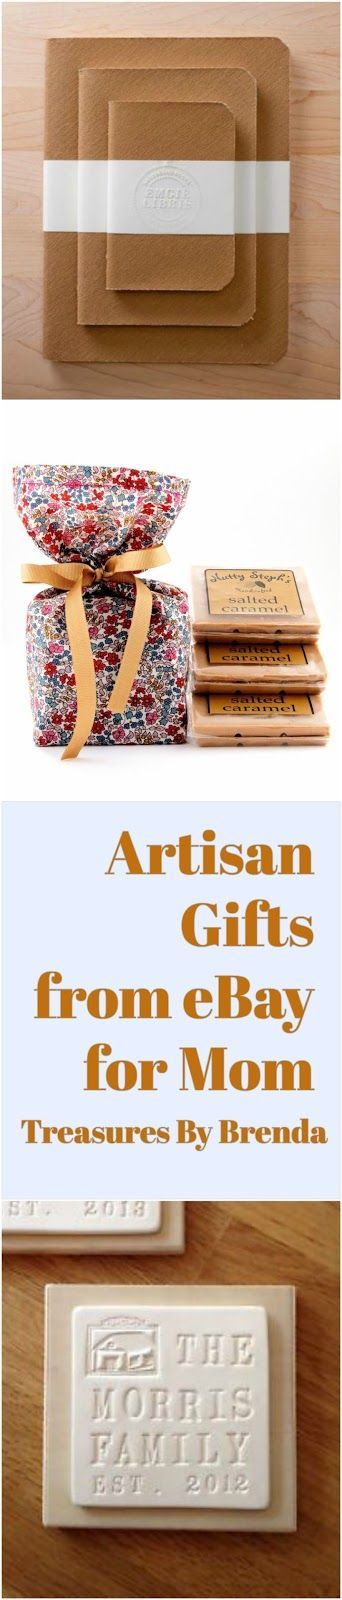 Treasures By Brenda: Artisan Gift Ideas for Mom including  Nutty Steph's sal...